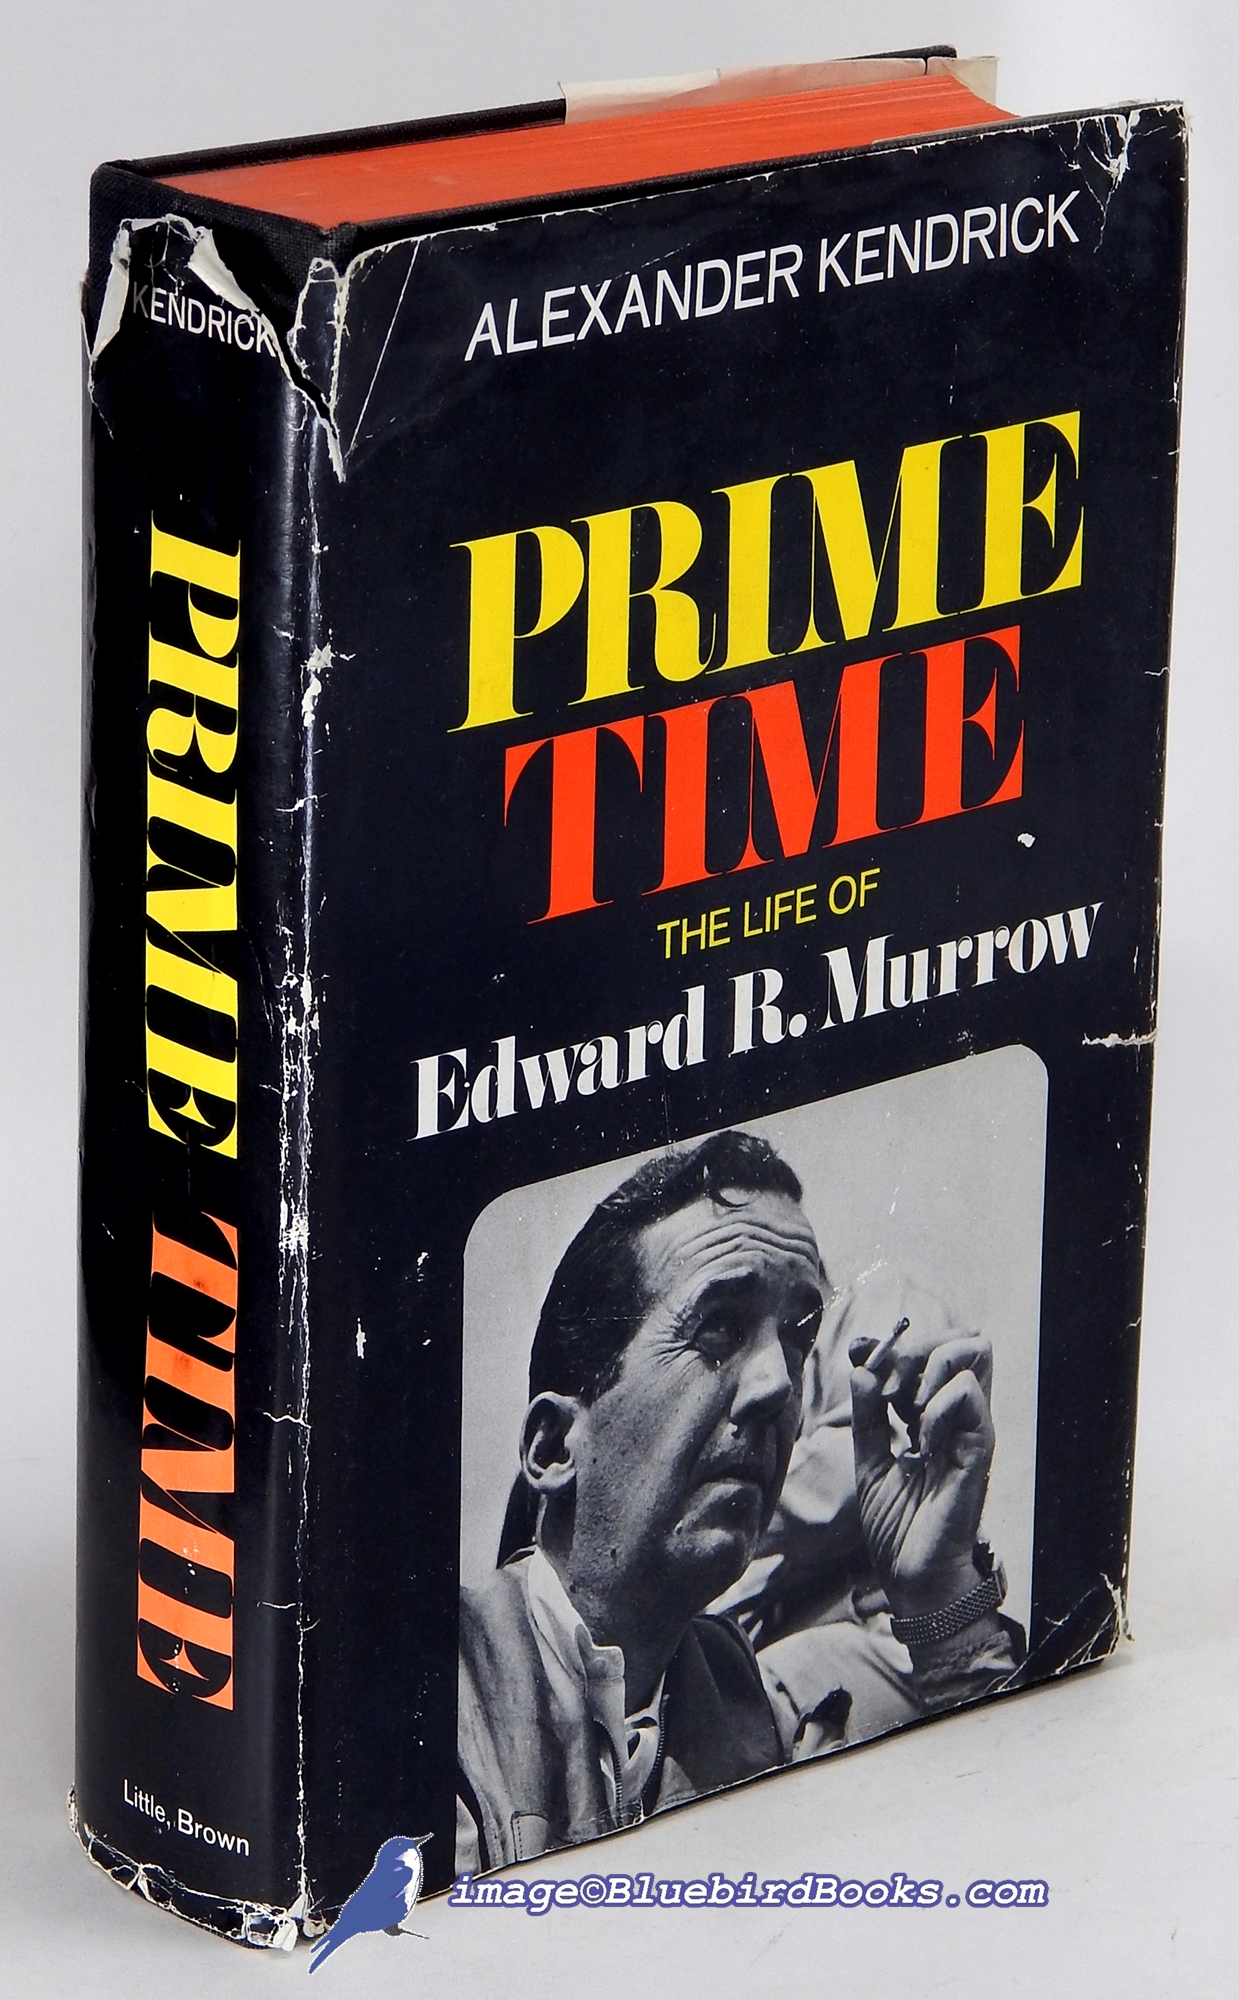 KENDRICK, ALEXANDER - Prime Time: The Life of Edward R. Murrow